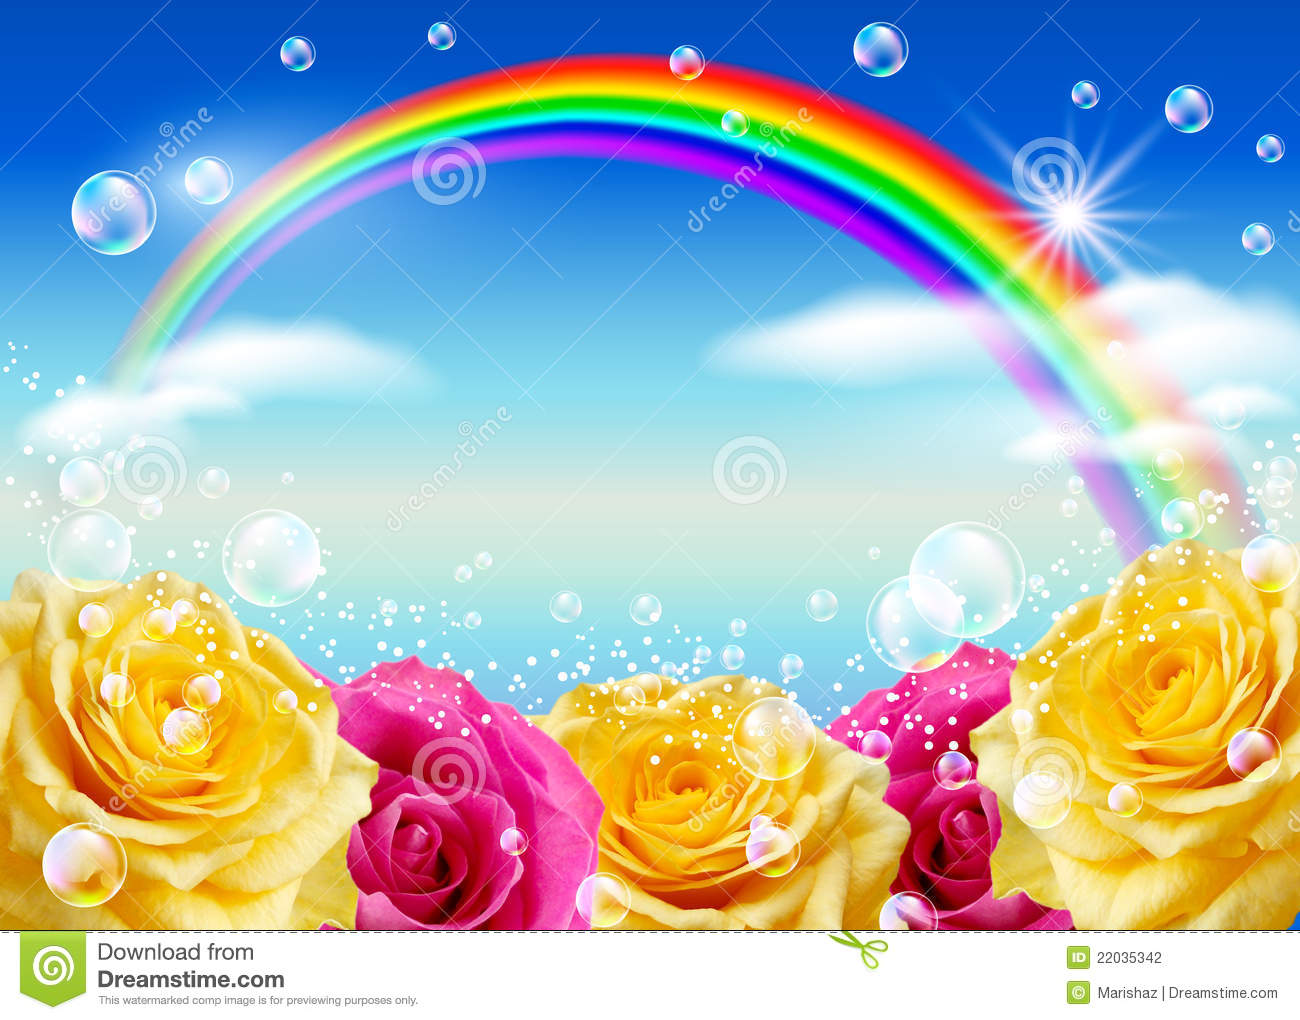 Roses Rainbow And Bubbles Against The Sky